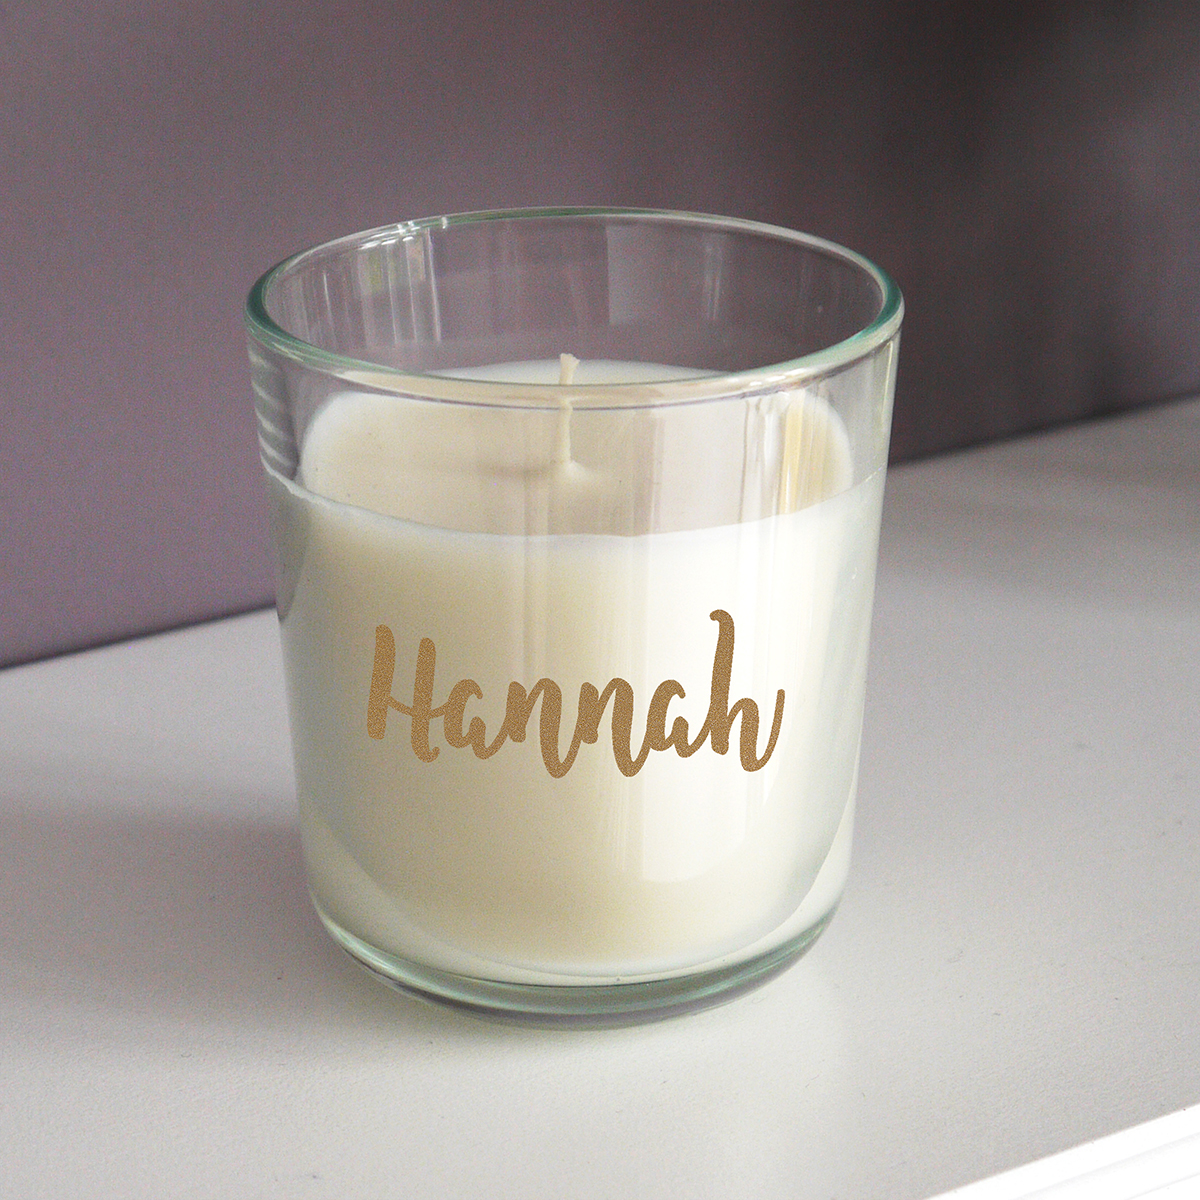 Personalised Candle - Metallic Gold Name